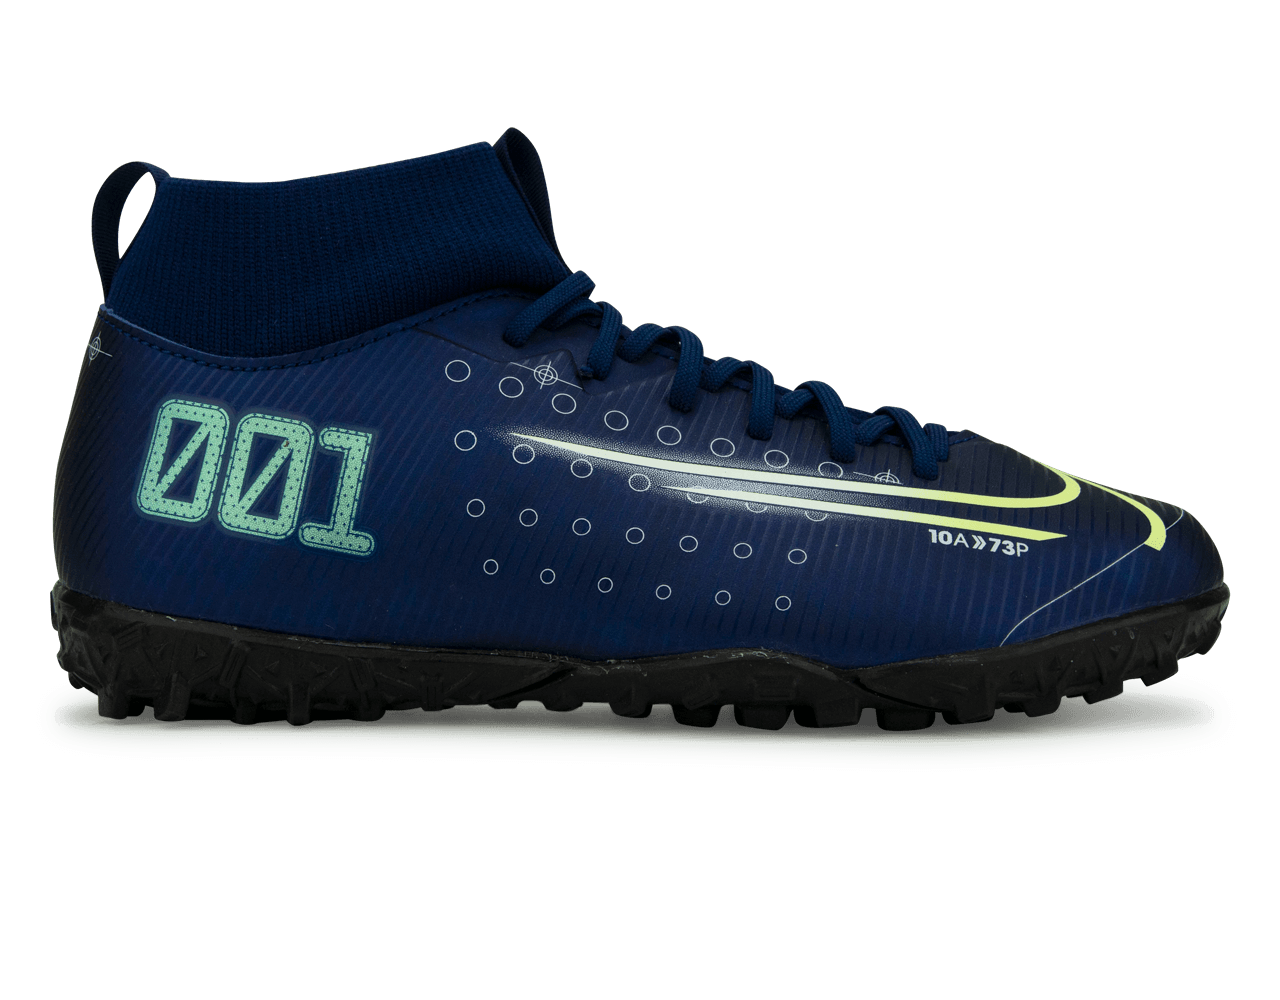 Nike Kids Mercurial Superfly 7 Academy MDS Turf Soccer Shoes Blue Void/Barely Volt/White